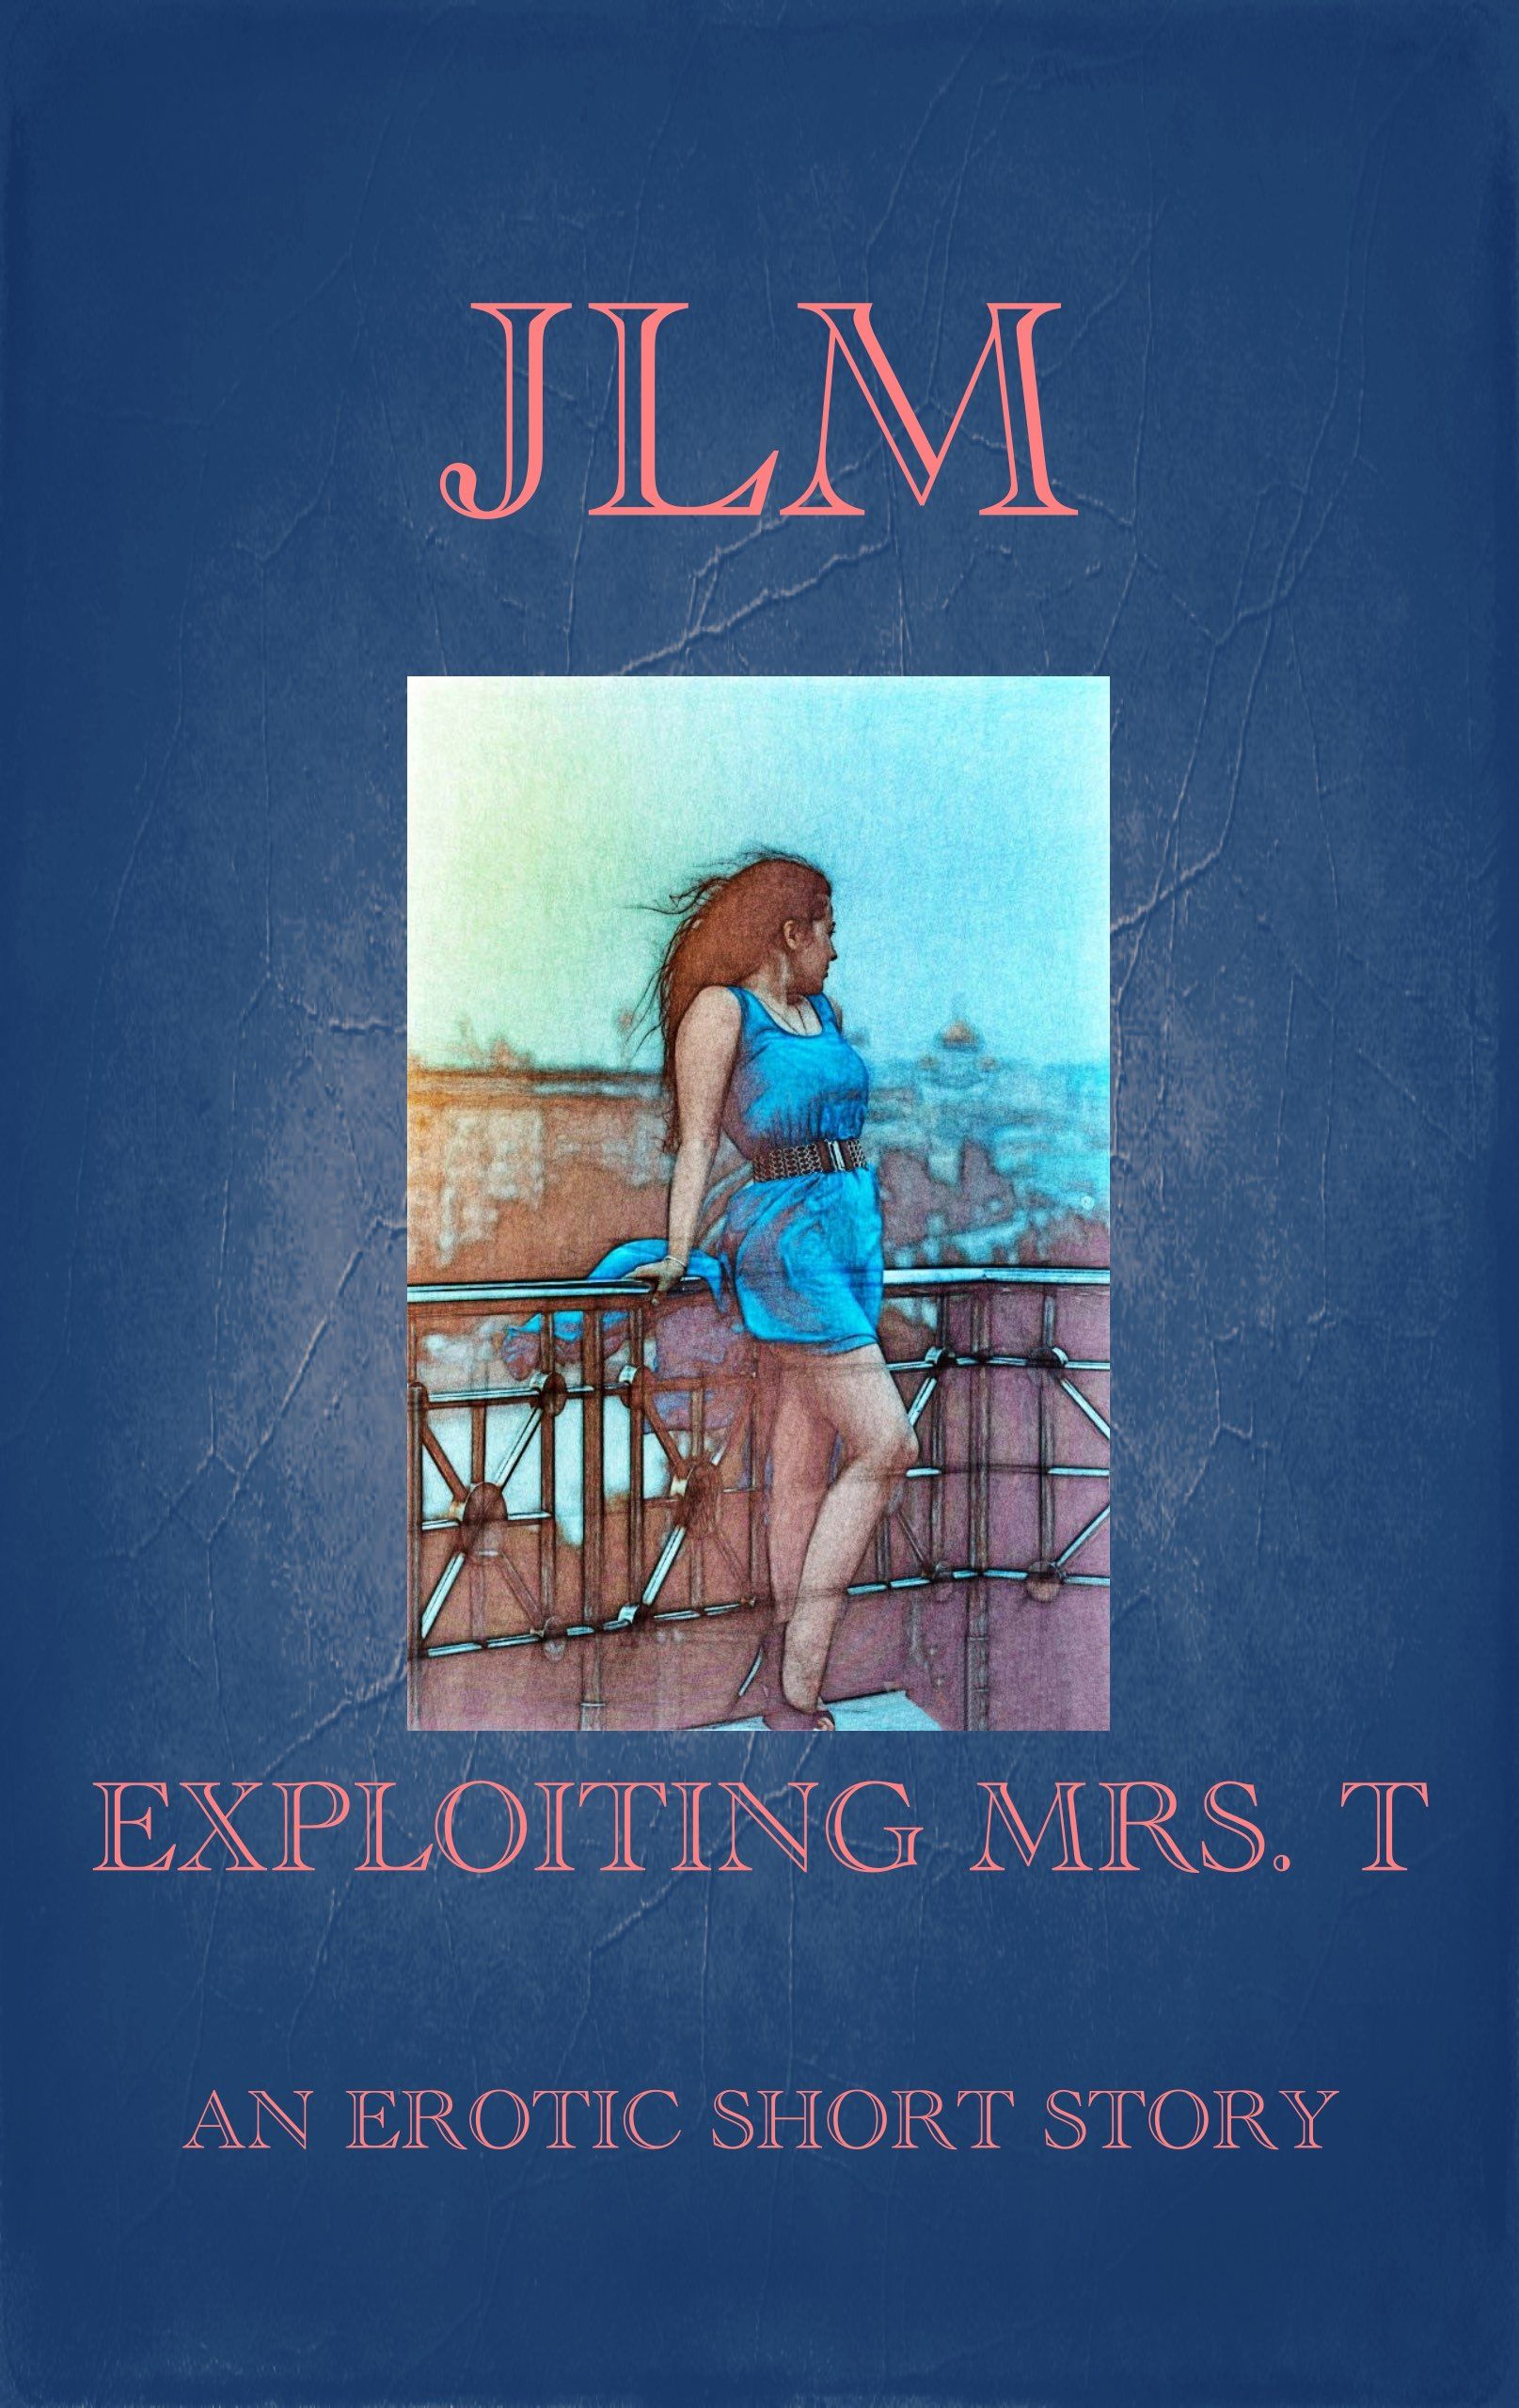 Exploiting Mrs. T: An Erotic Short Story's Book Image